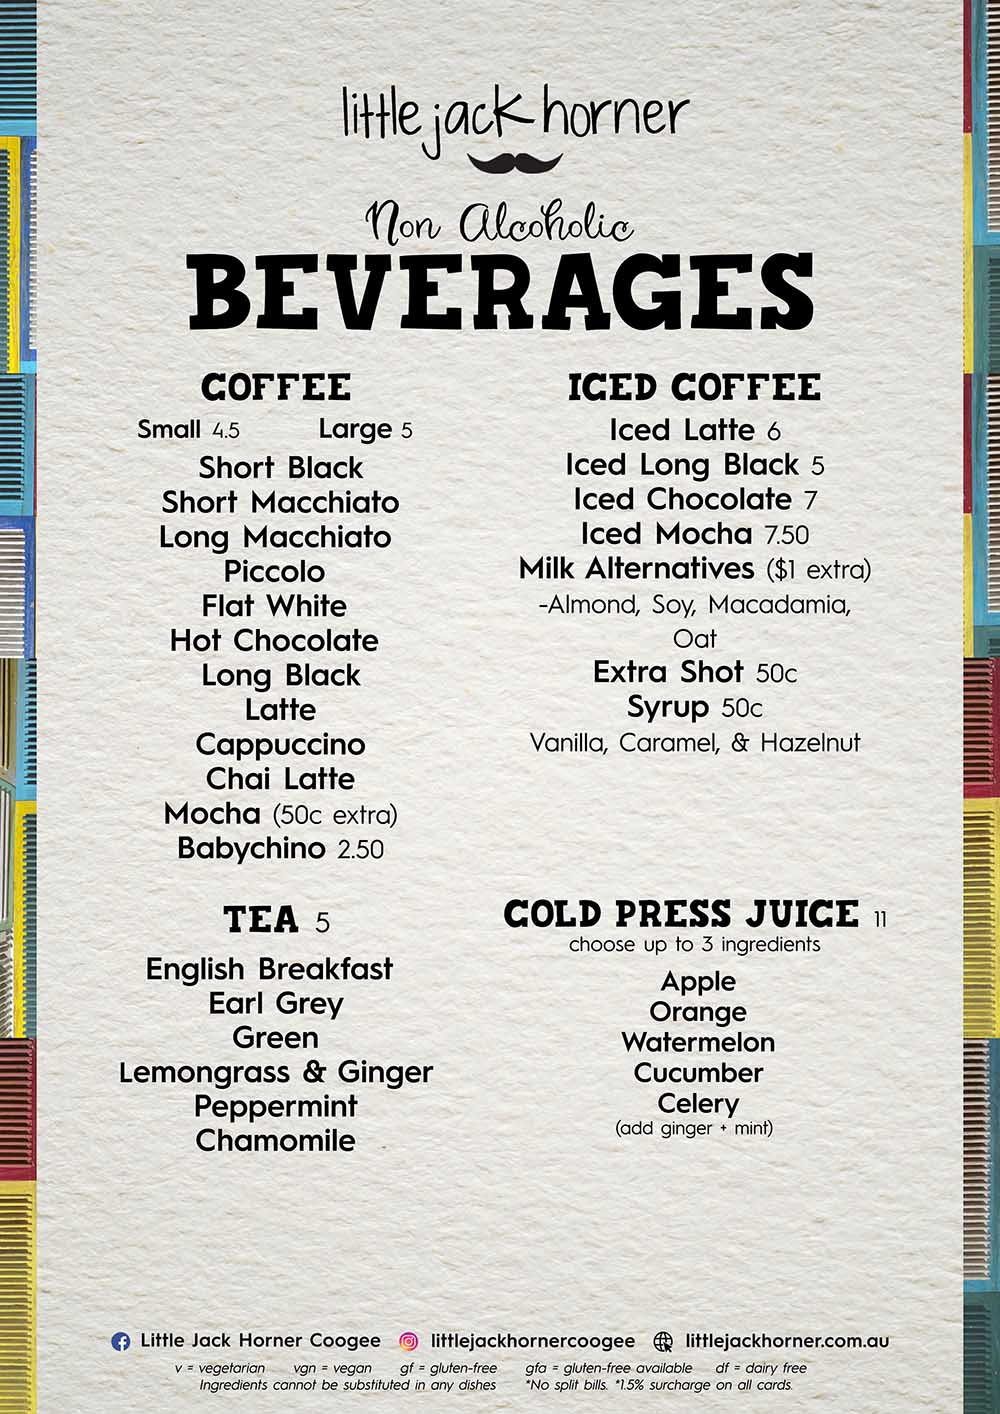 Beverages coffee and cold press juices